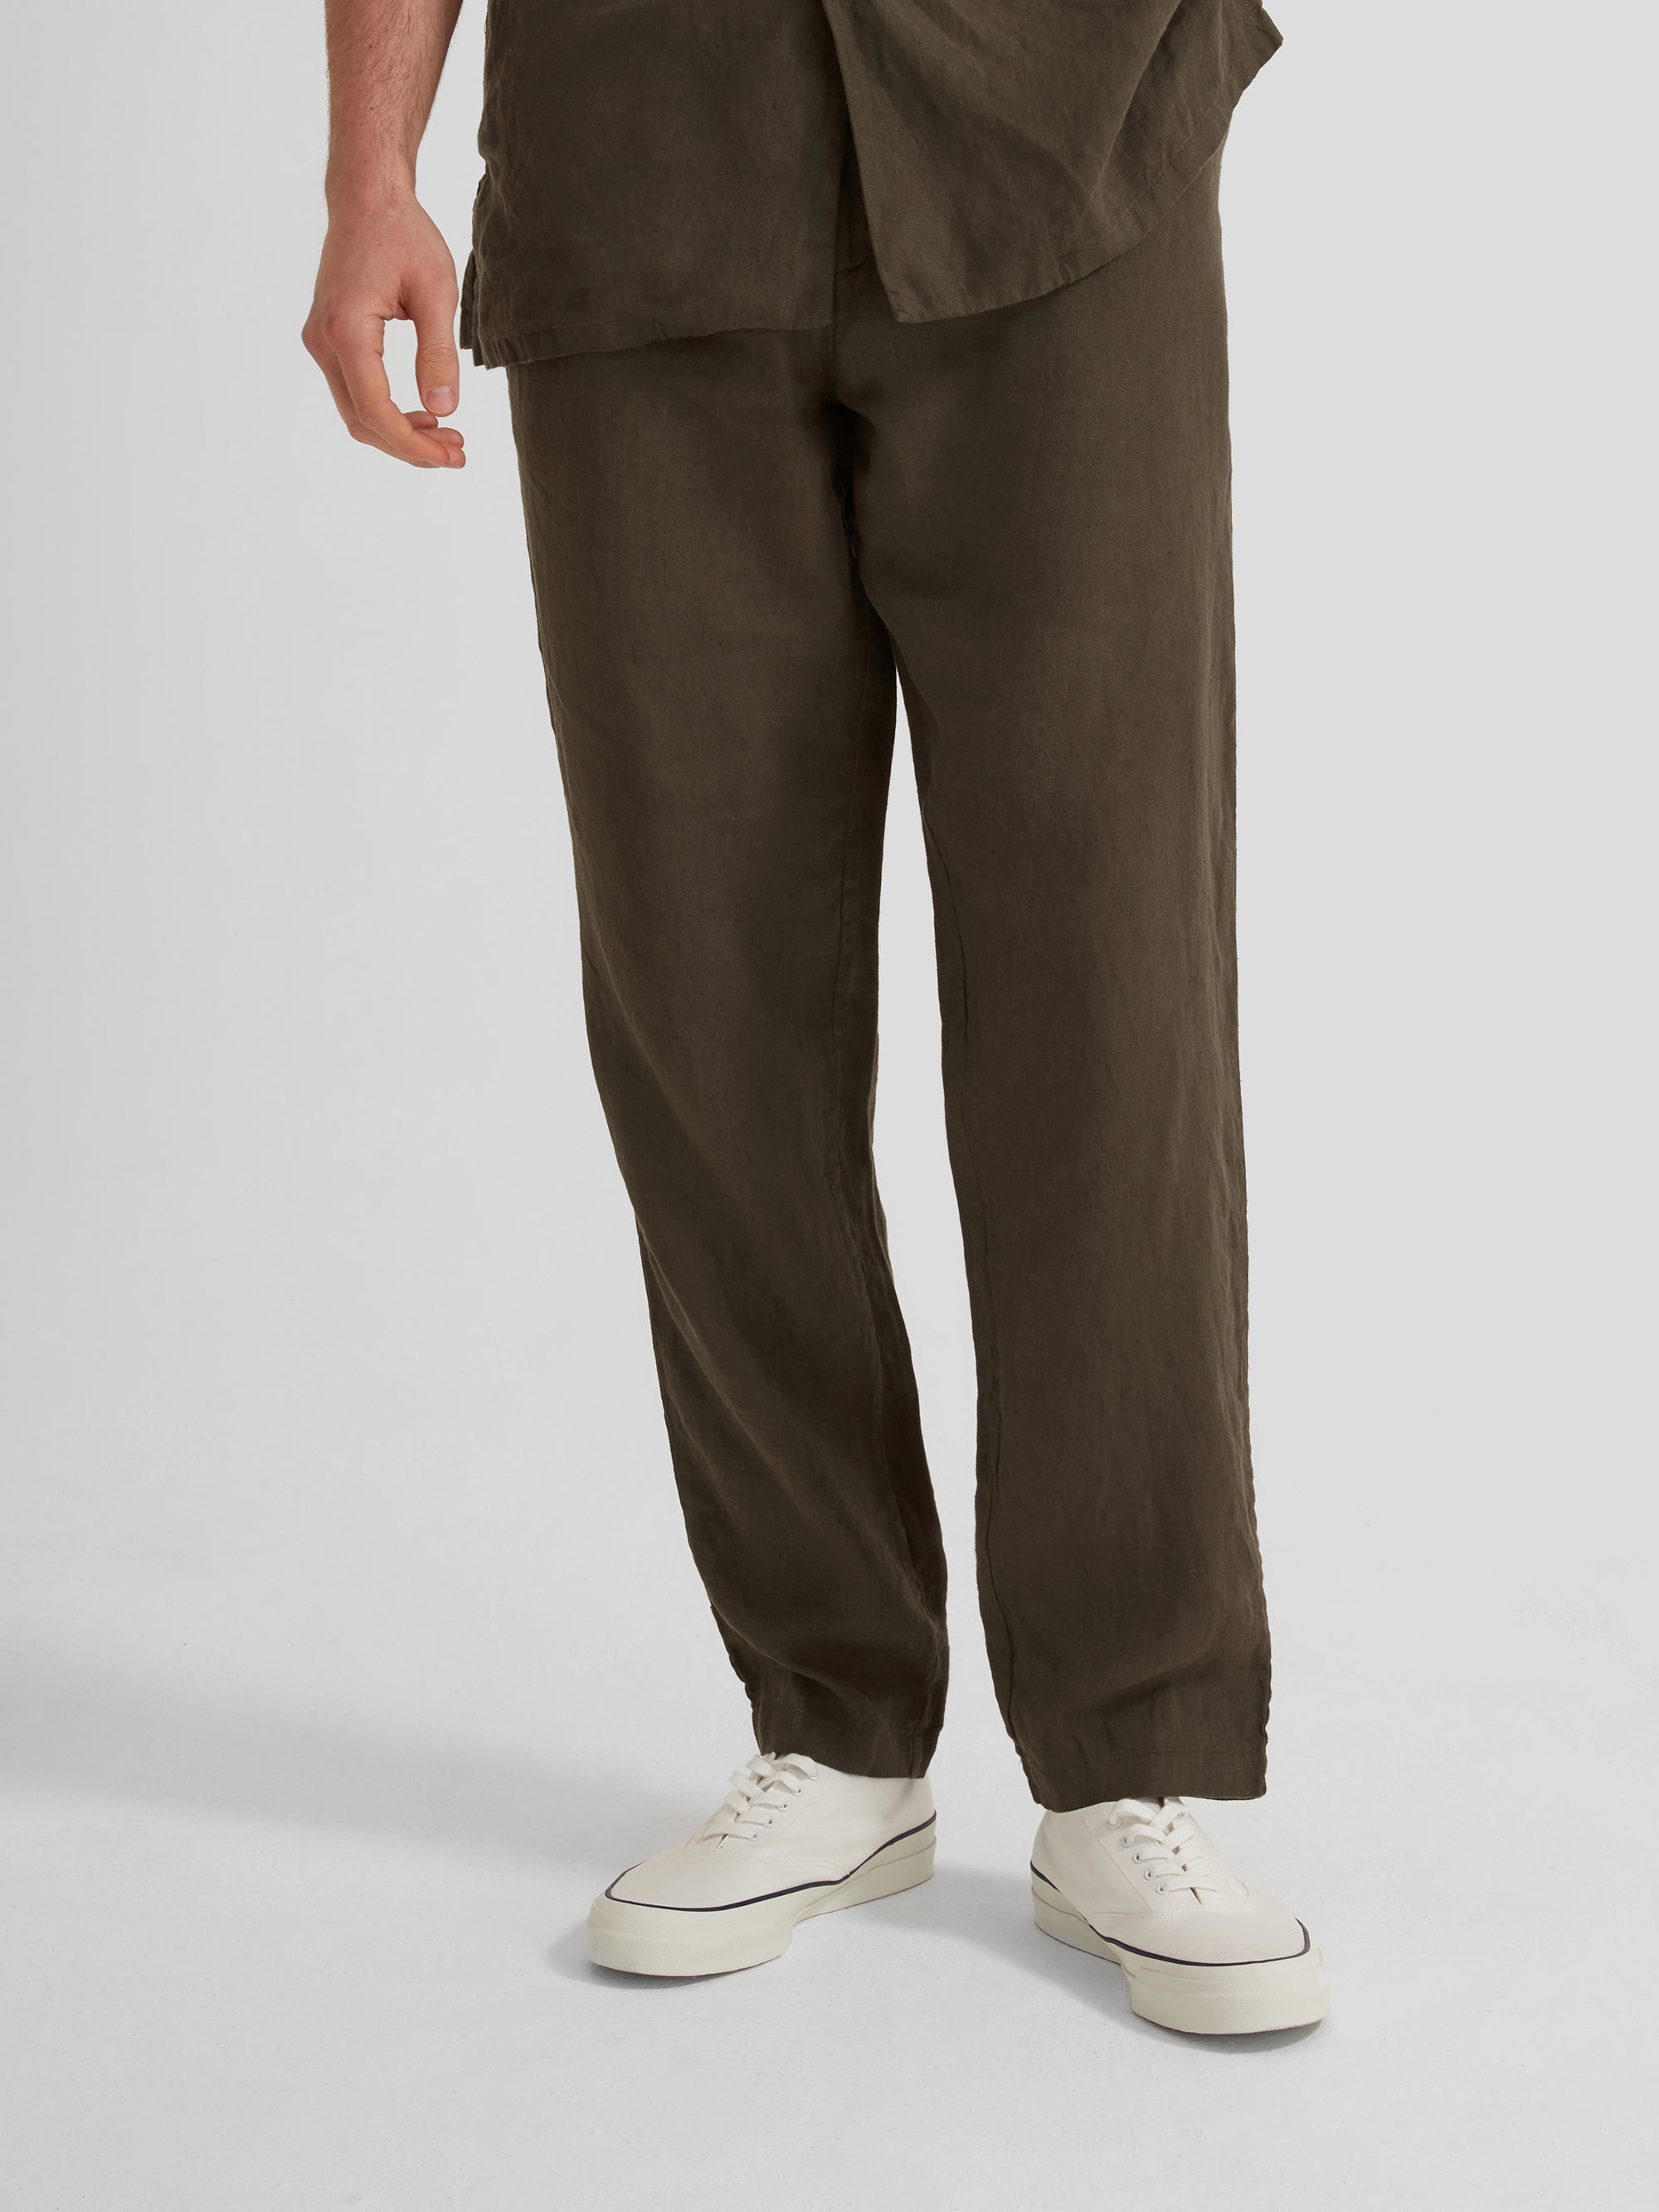 95%OFF! Our legacy Drape Trousers